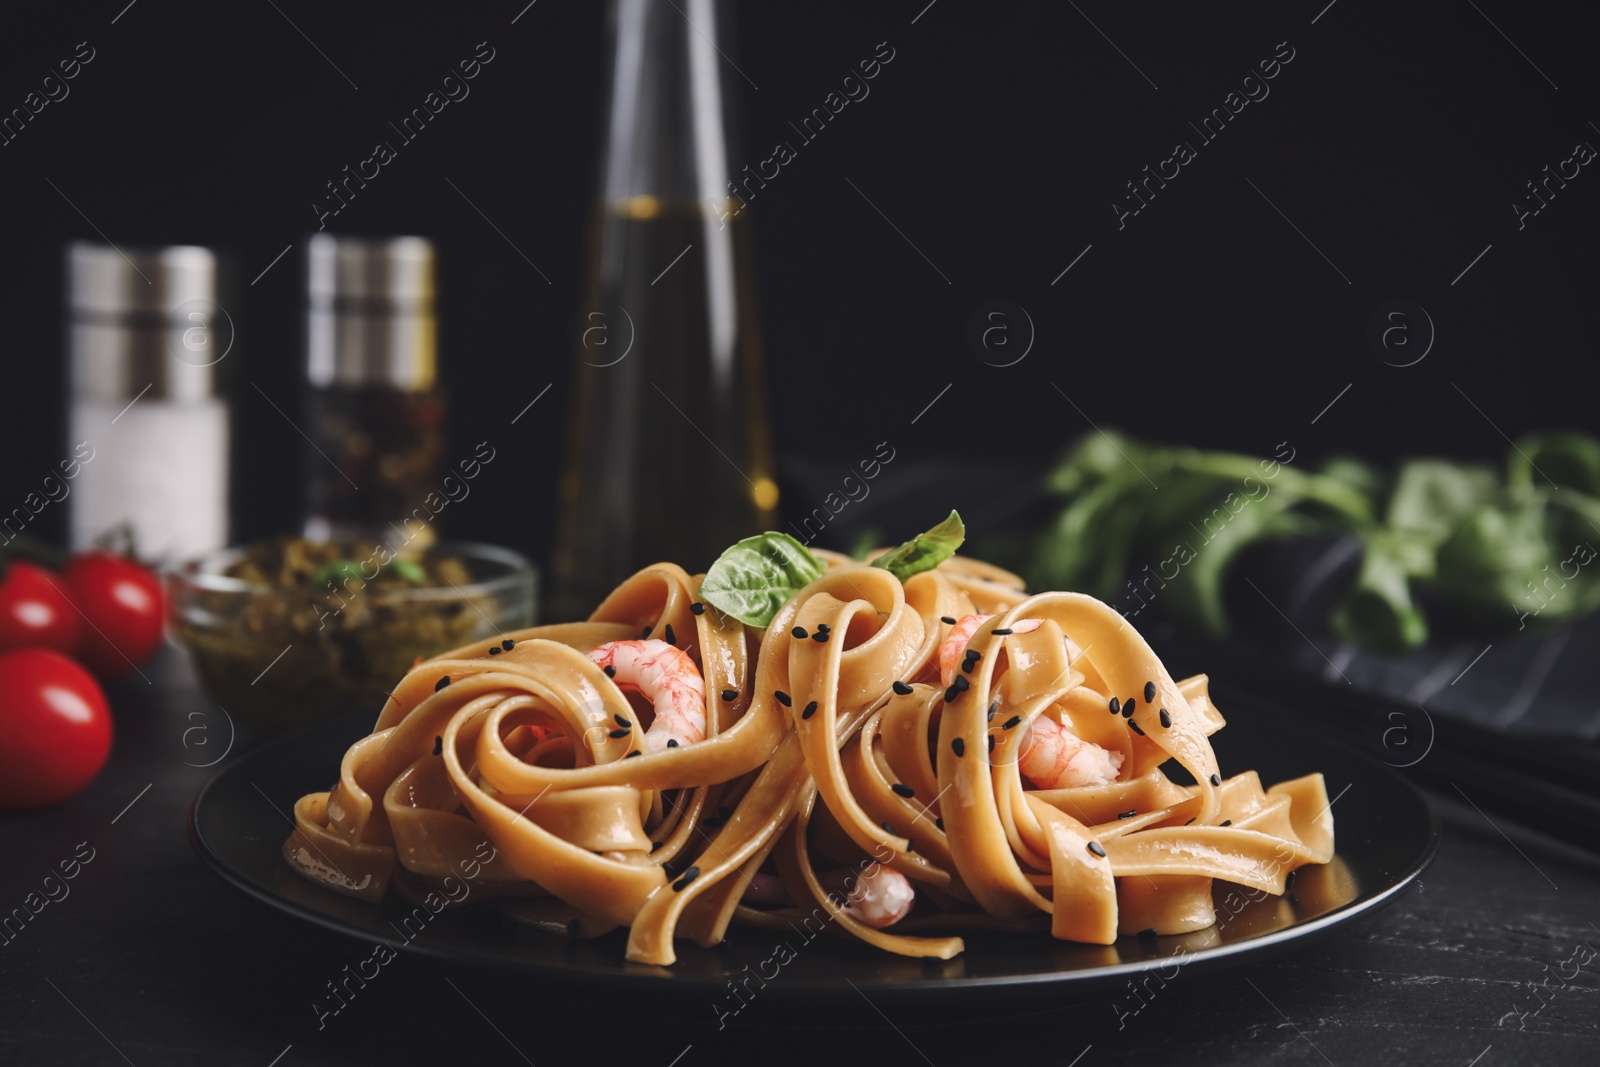 Image of Tasty buckwheat noodles with shrimps served on black table. Food photography  